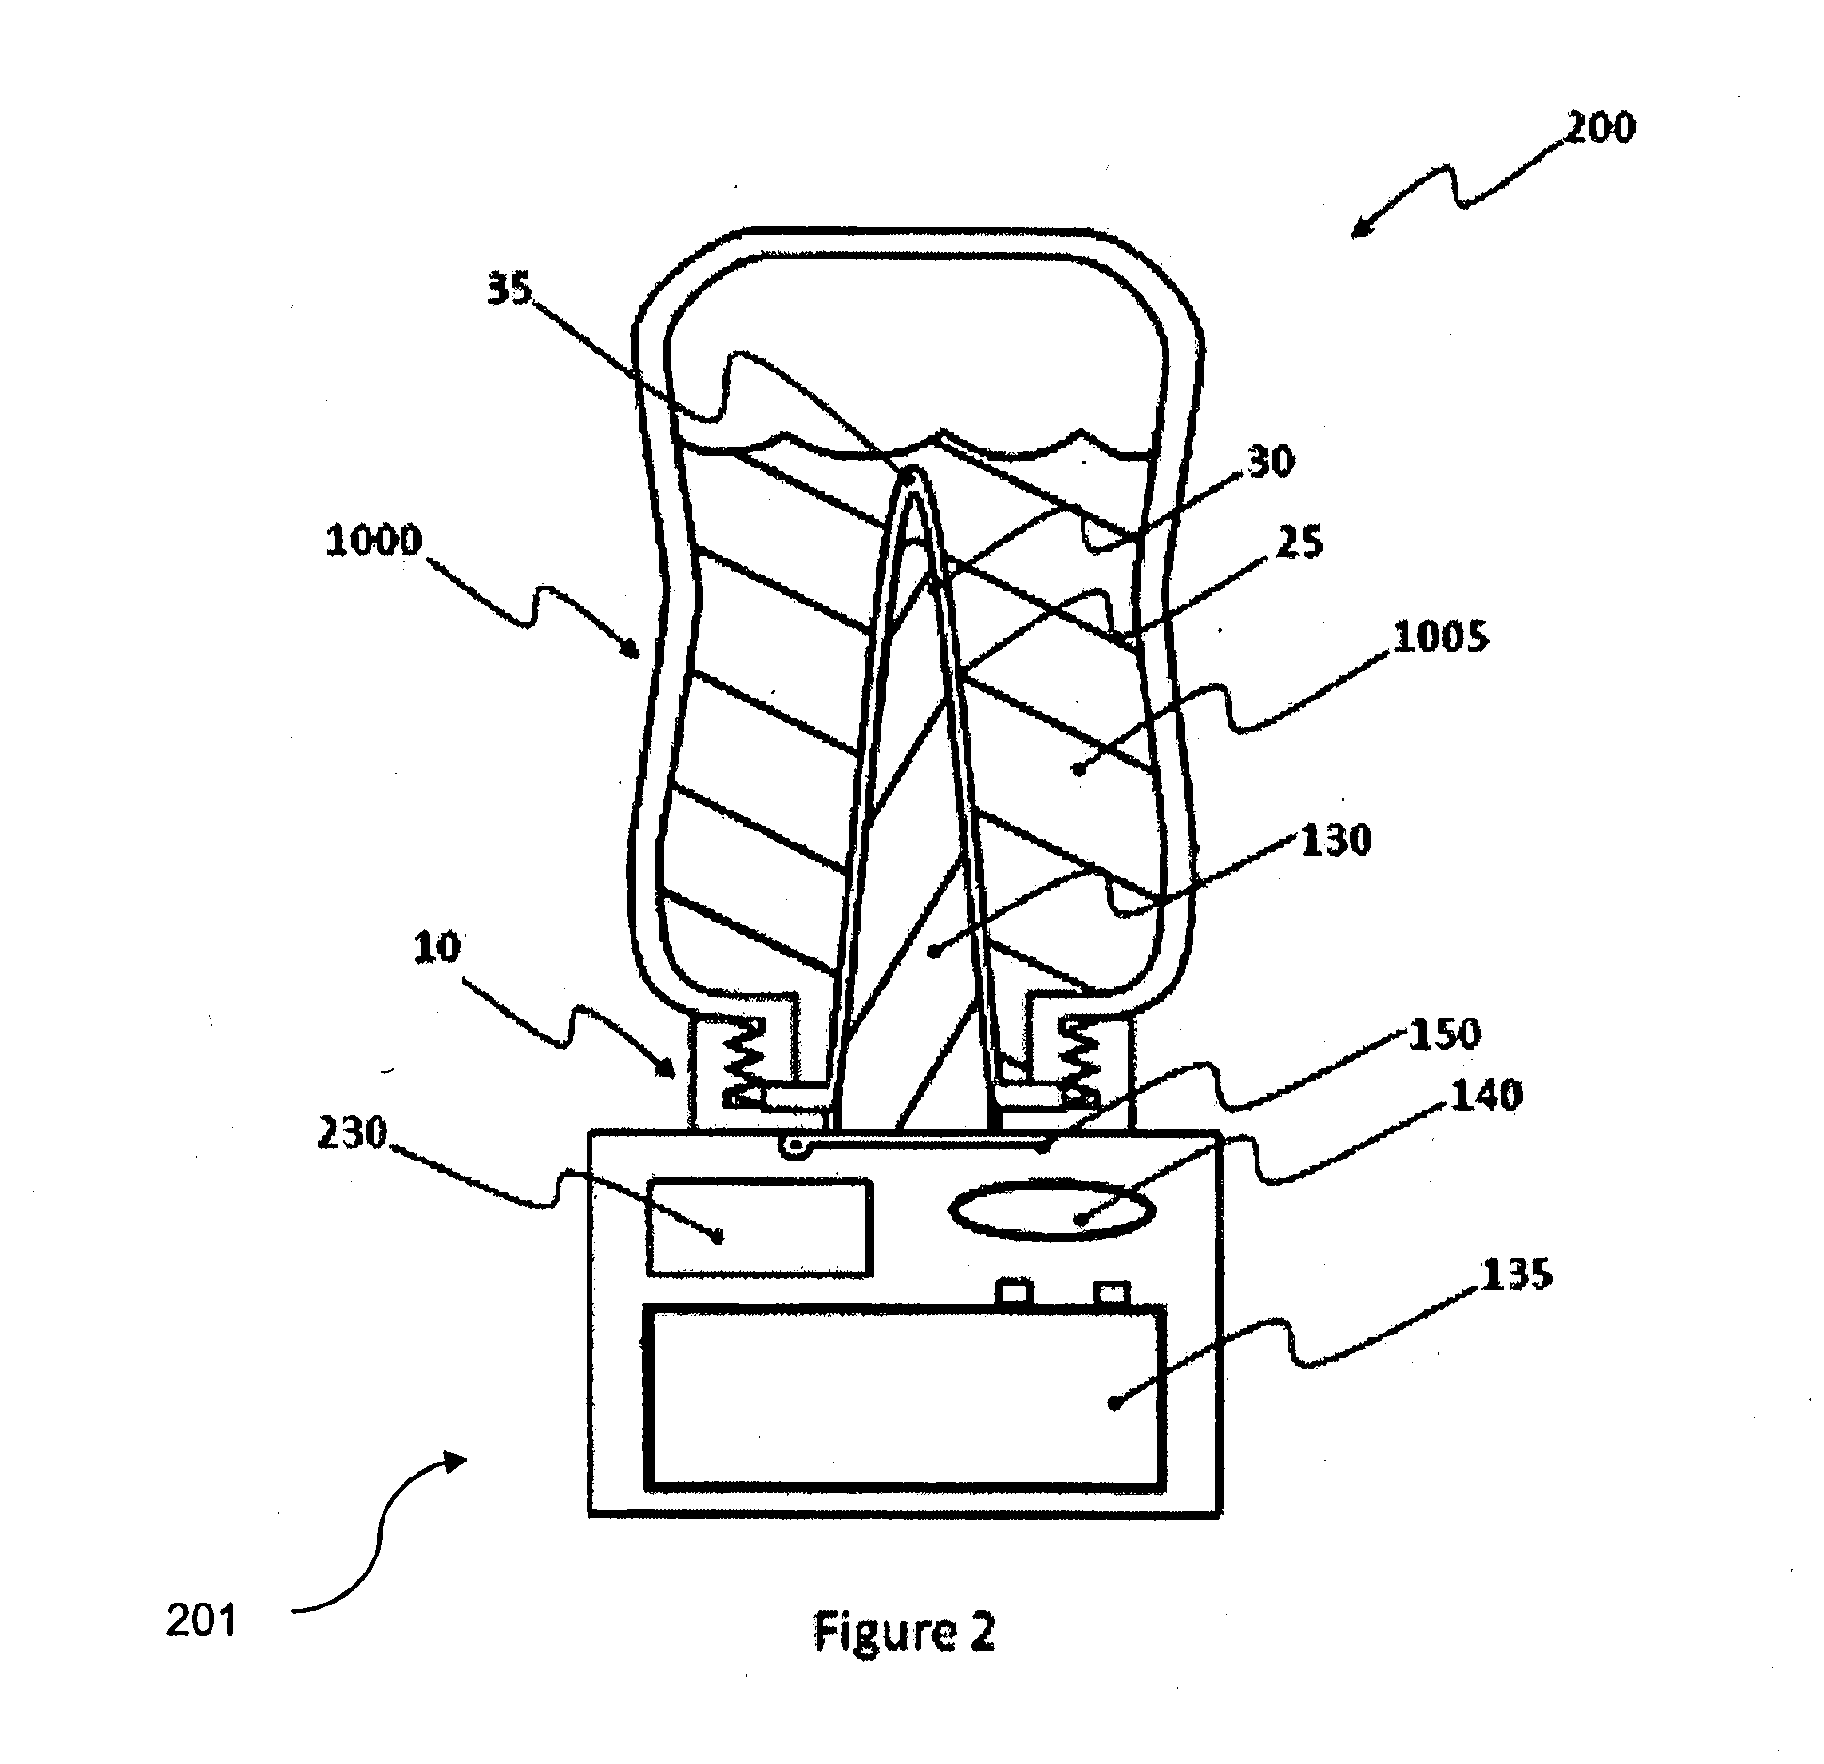 Heat Transfer Apparatus and Container